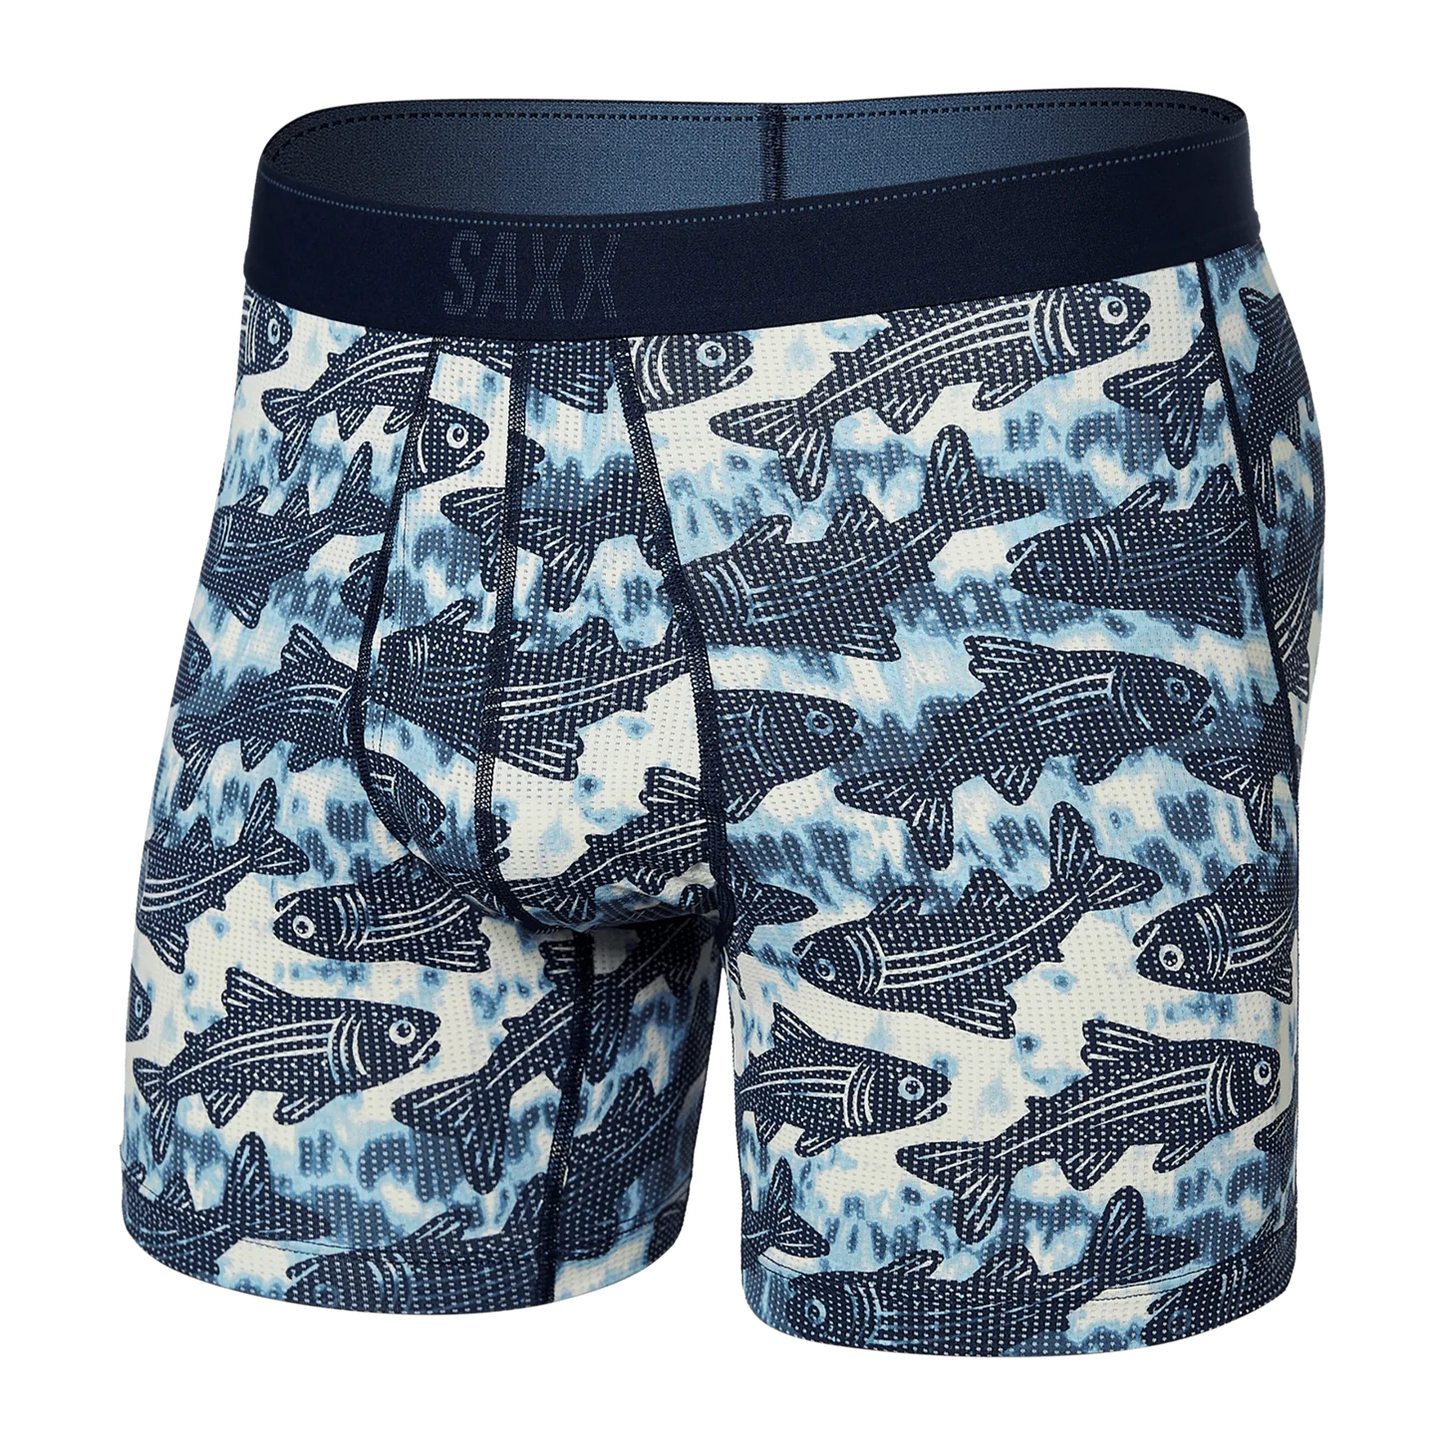 QUEST QUICK DRY MESH BOXER BRIEF FLY